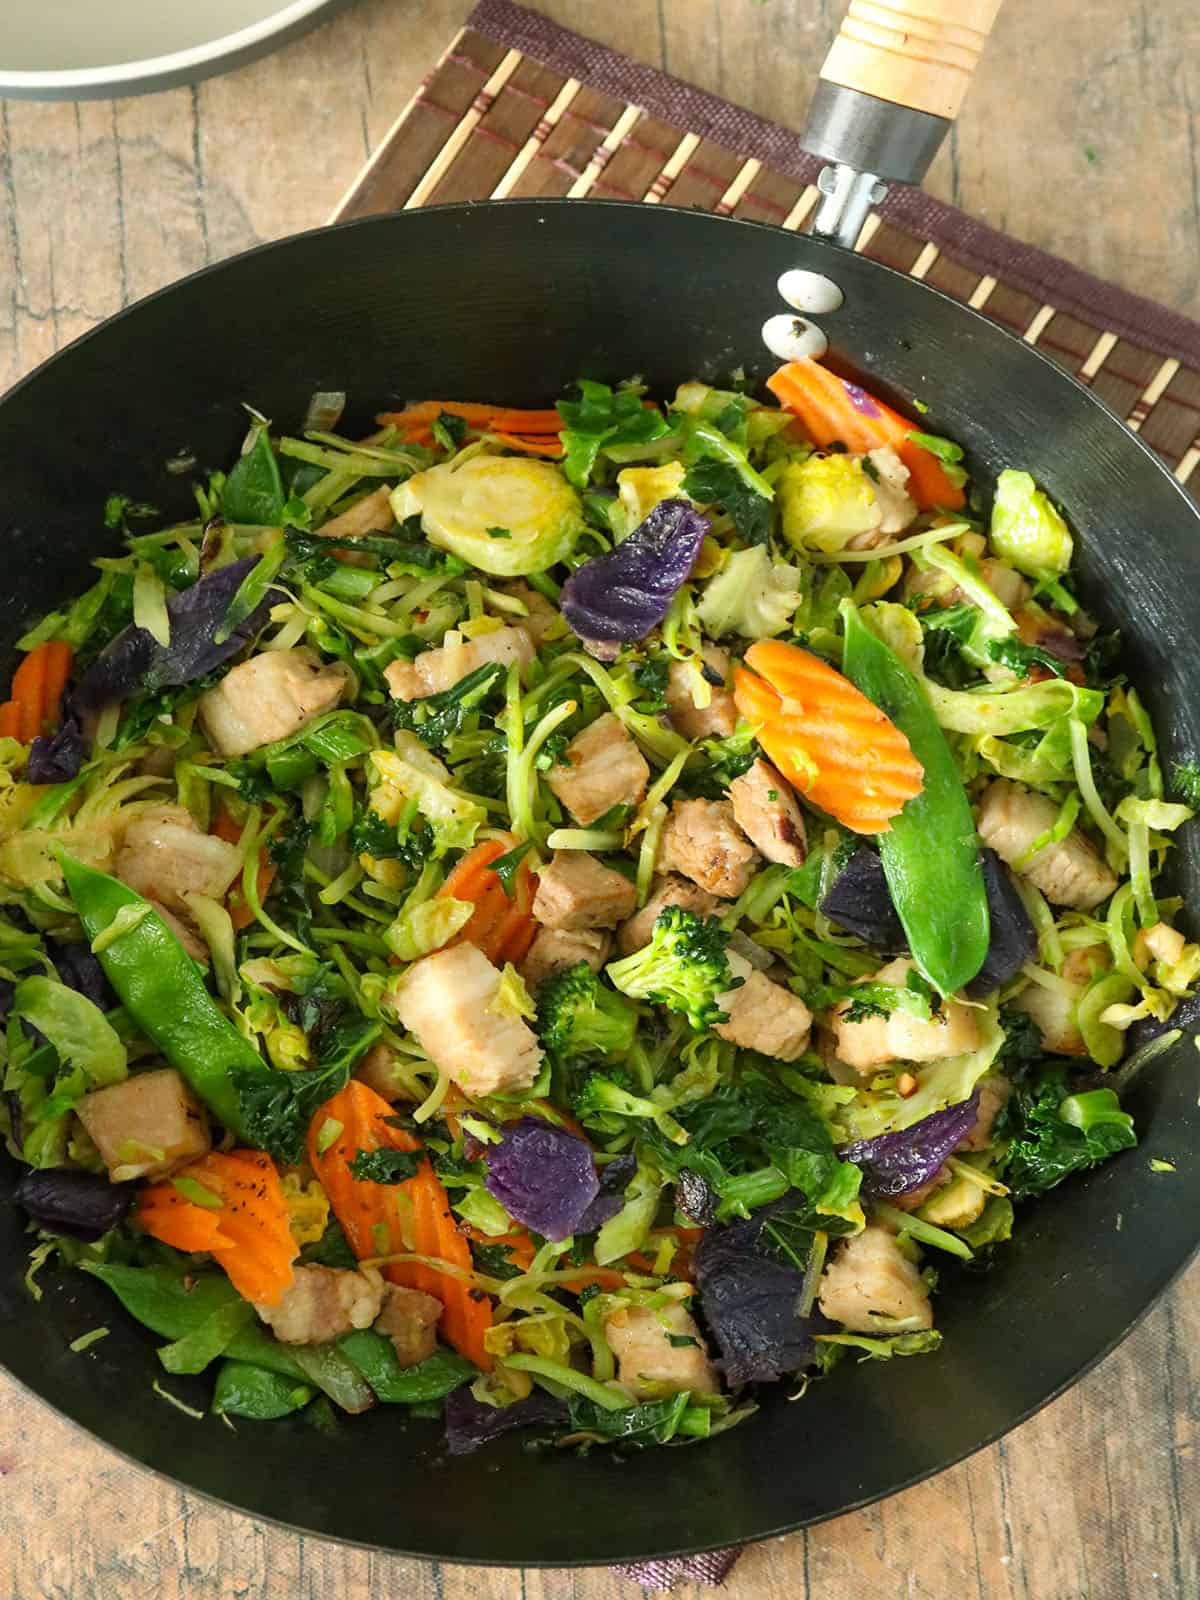 Asian Stir-fry with vegetables and tender pork strips in a wok